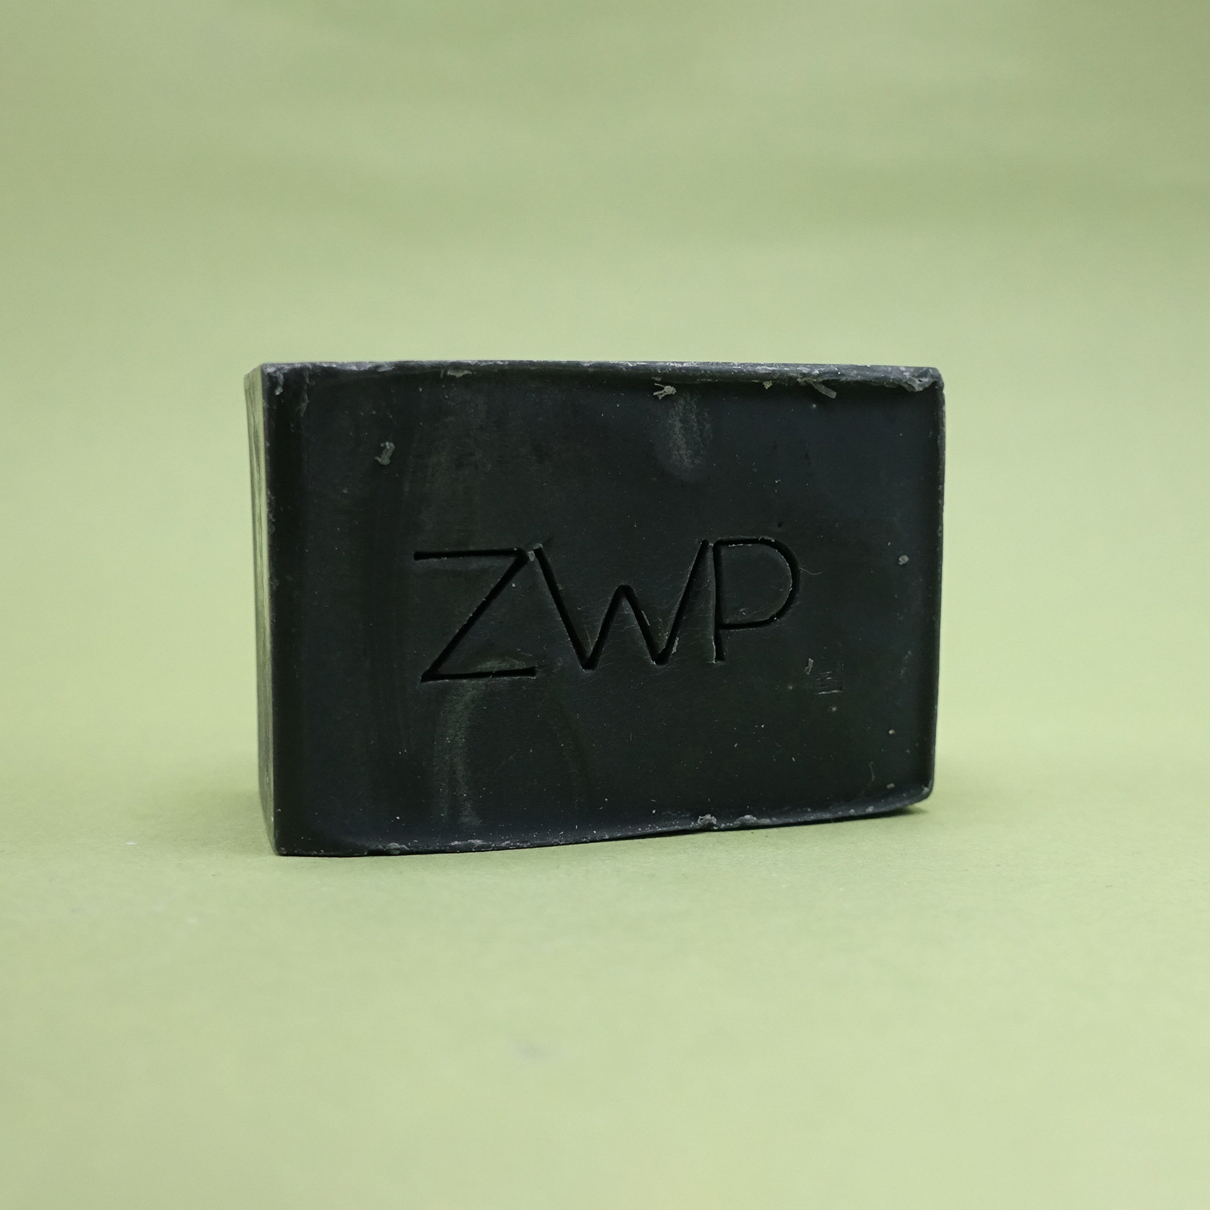 Activated Charcoal Soap Bar: Zero Waste Path